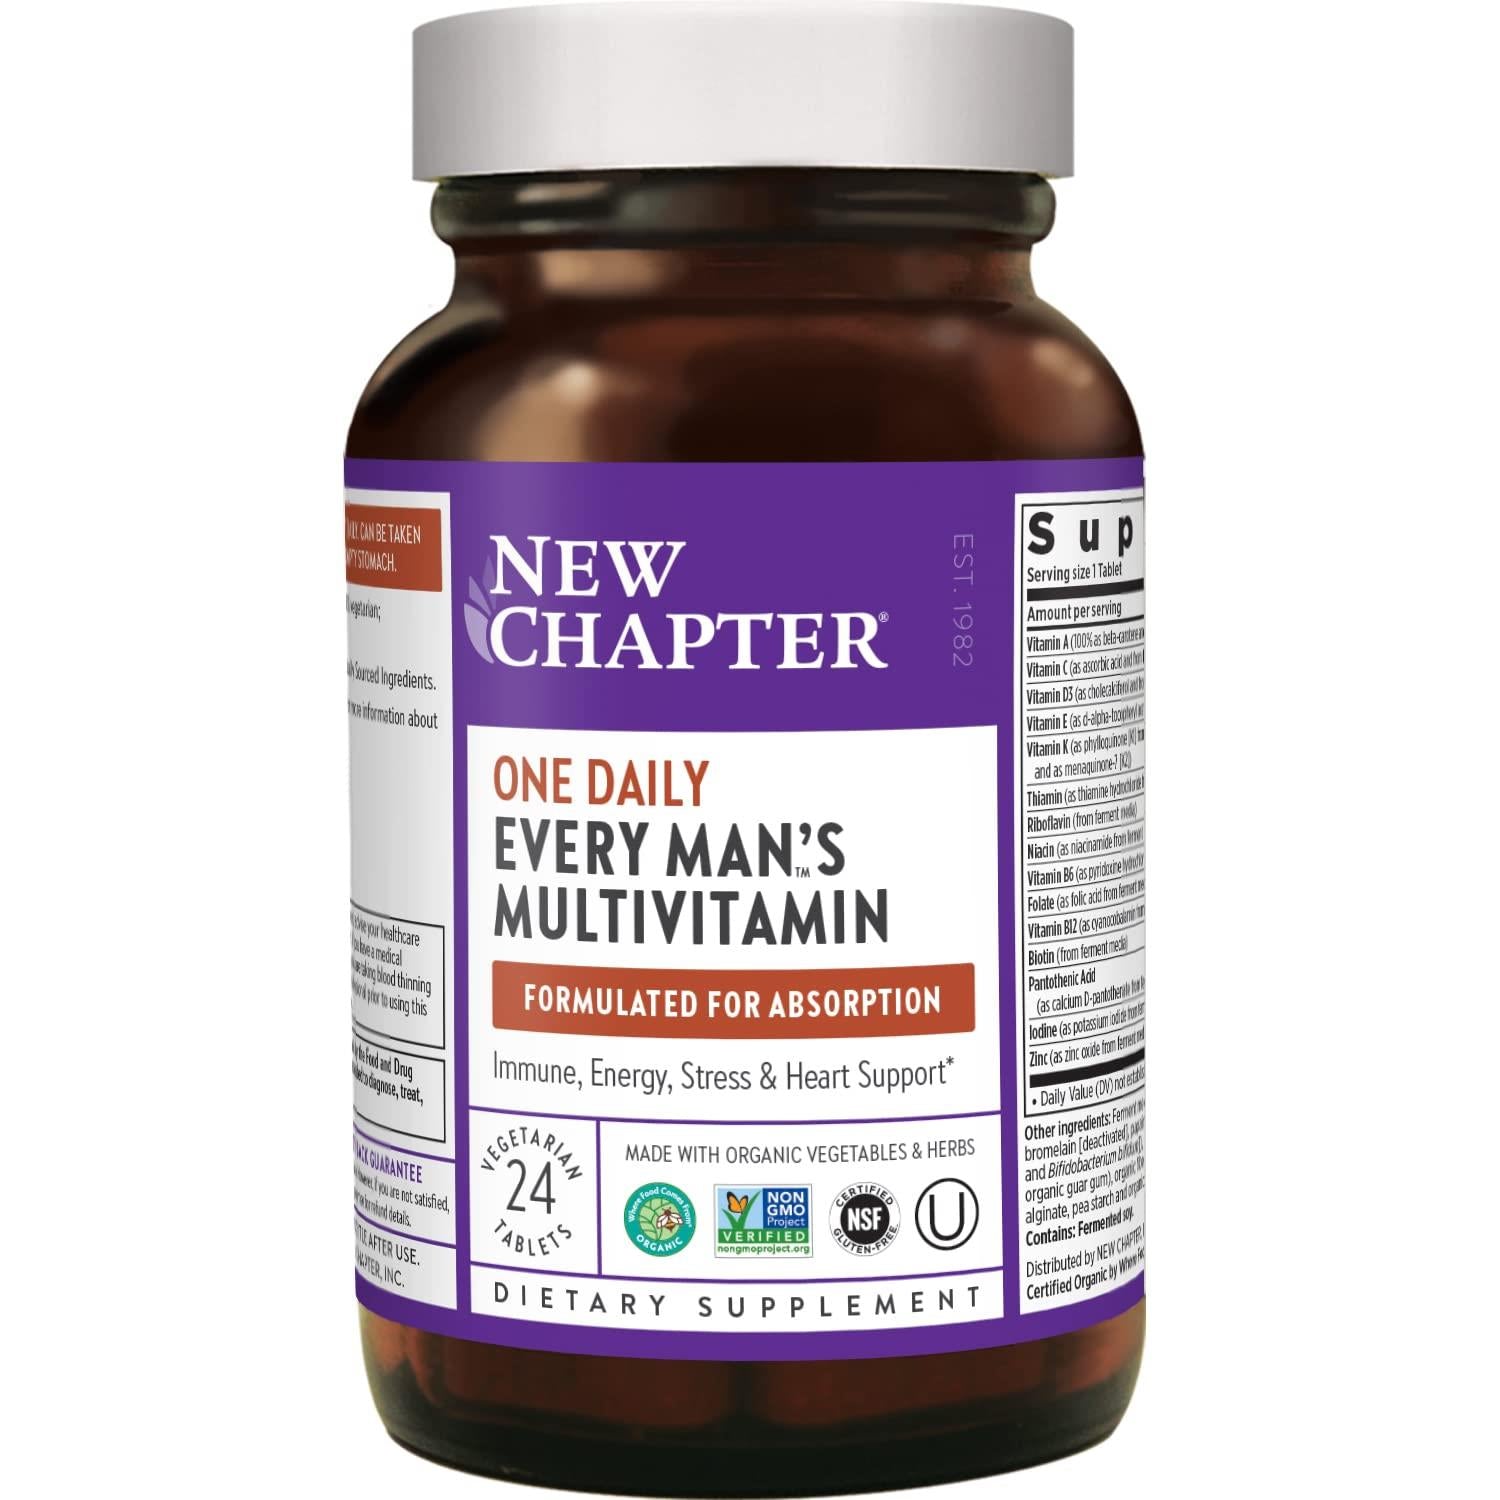 New Chapter Men’s Multivitamin + Immune, Energy & Stress Support – Every Man’s One Daily with Fermented Probiotics & Whole Foods + Vitamin D3 + Vitamin B6 & B12 + Organic Non-GMO Ingredients - 24 ct